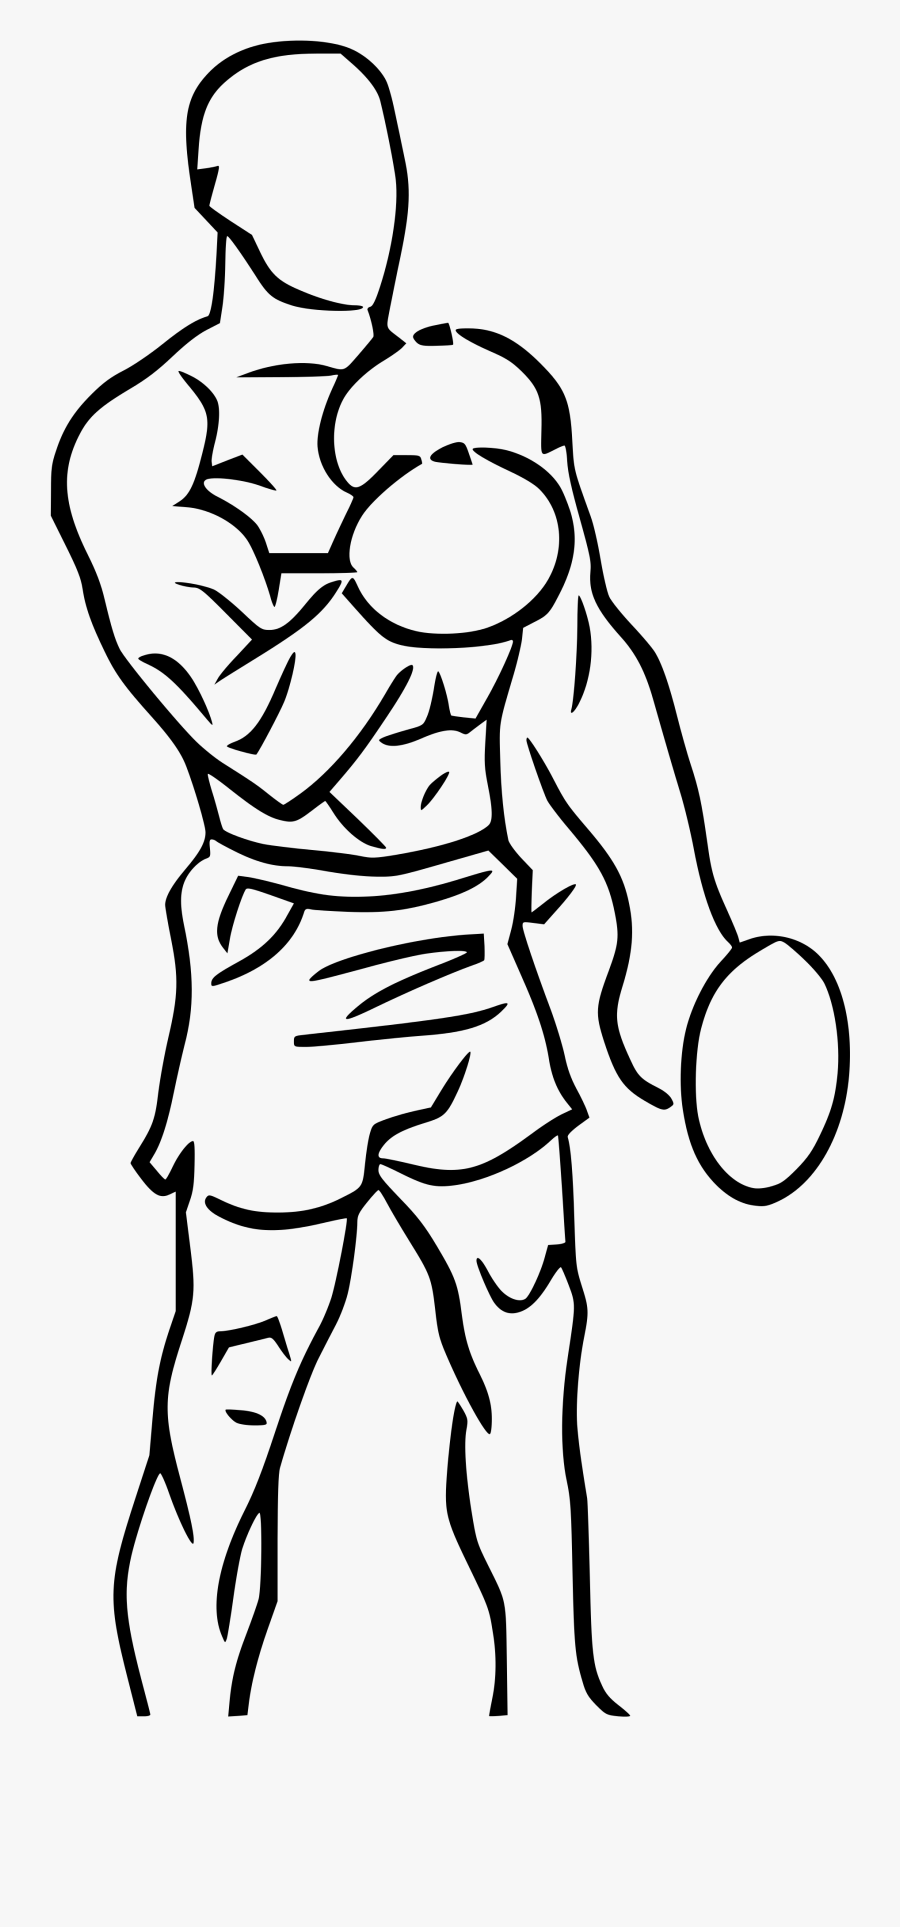 Cross Body Hammer Curl Drawing, Transparent Clipart